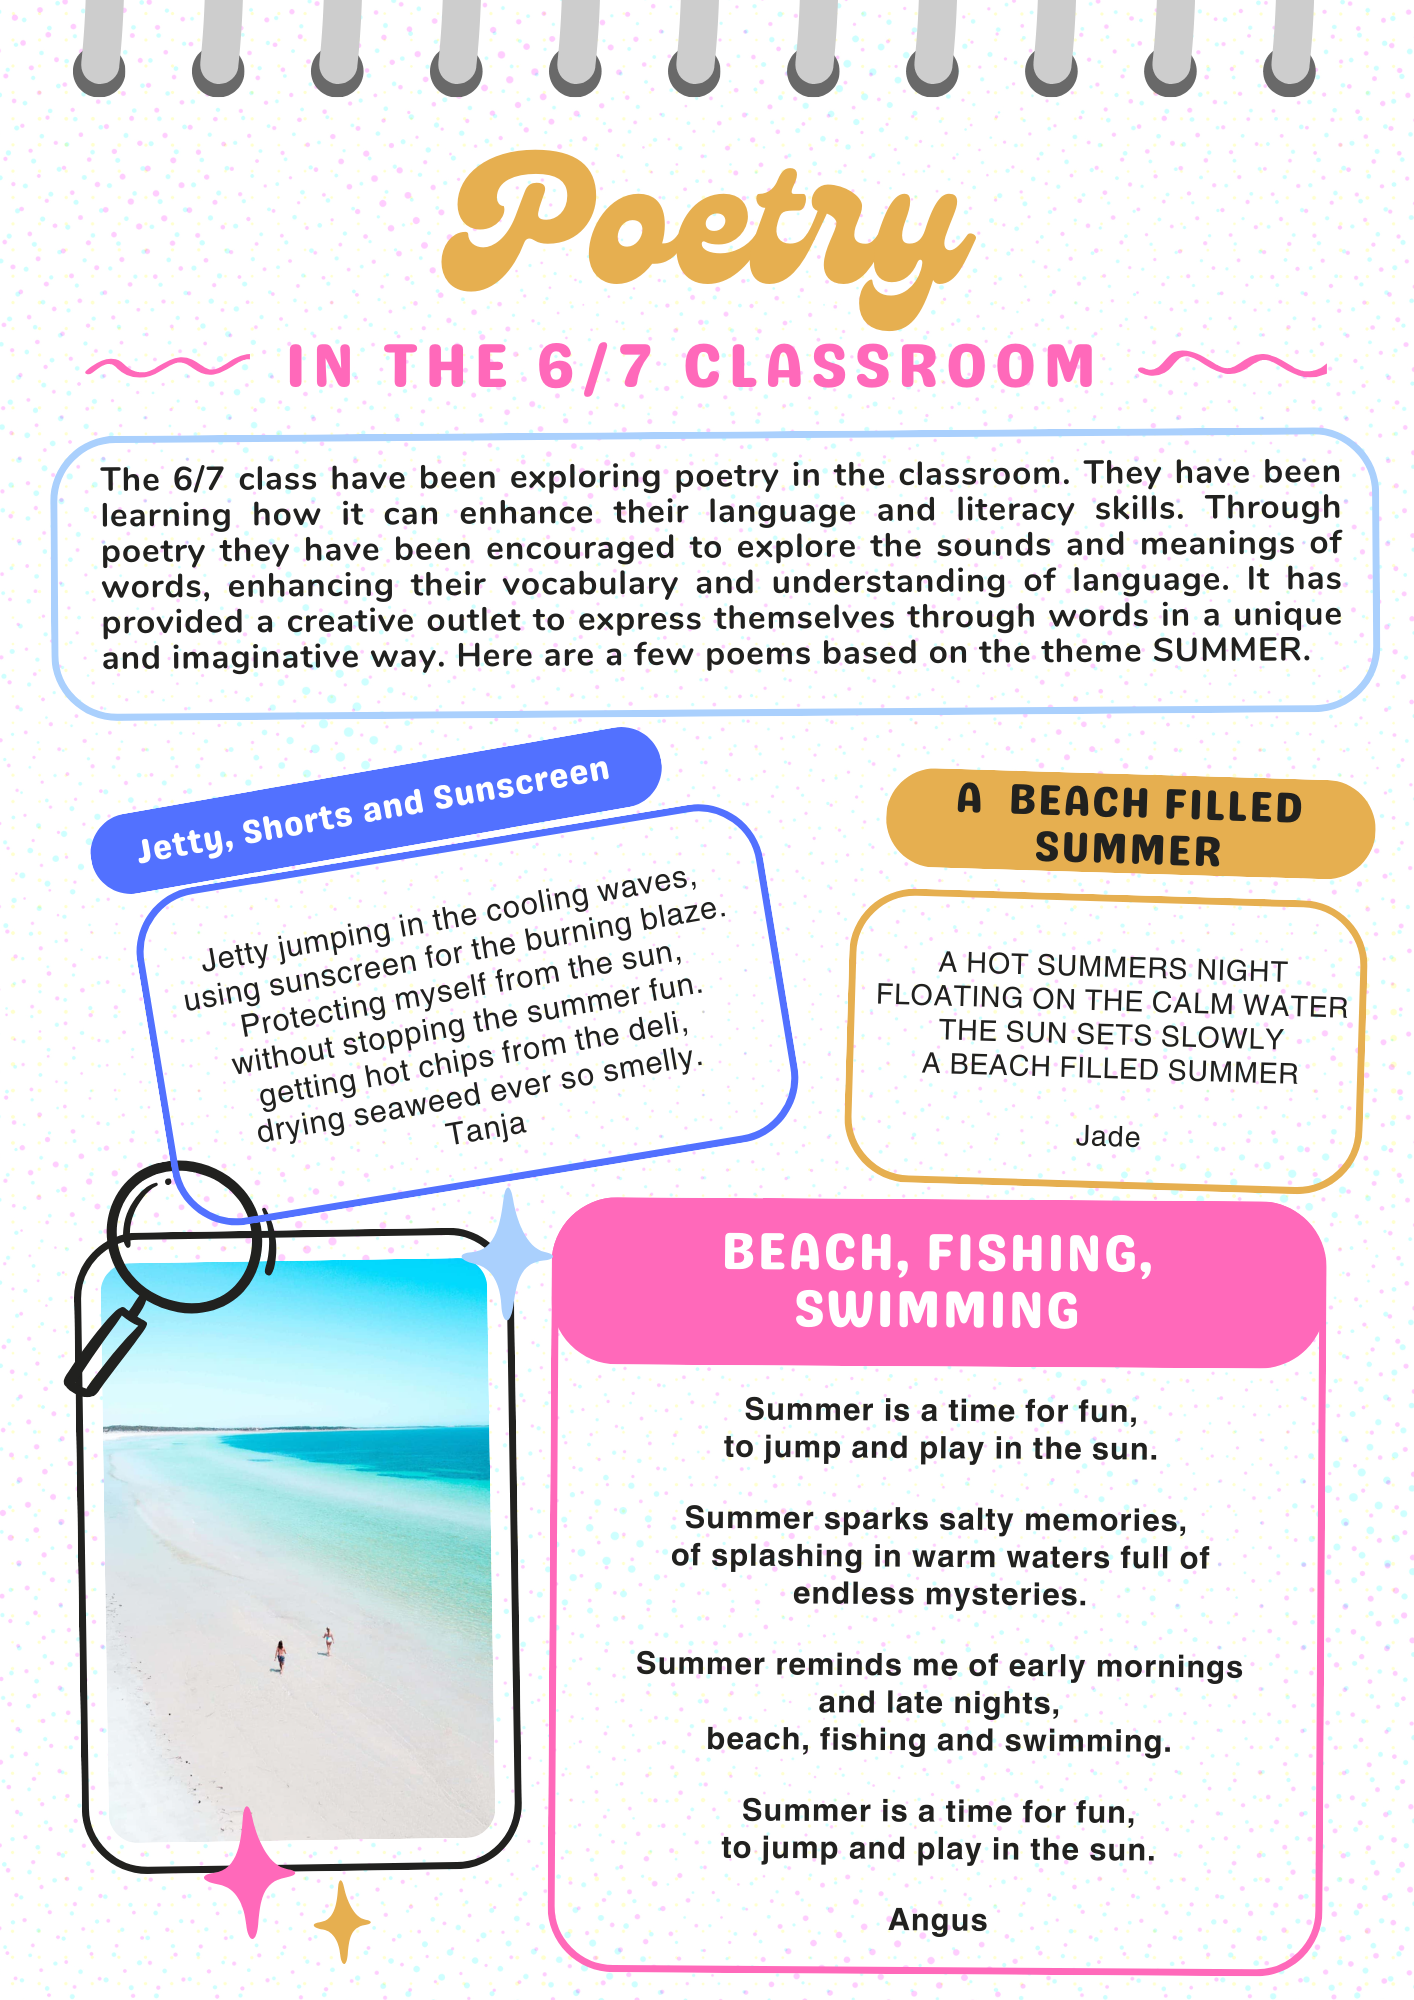 Blue and Pink Colorful Edgy School Classroom Newsletter.png